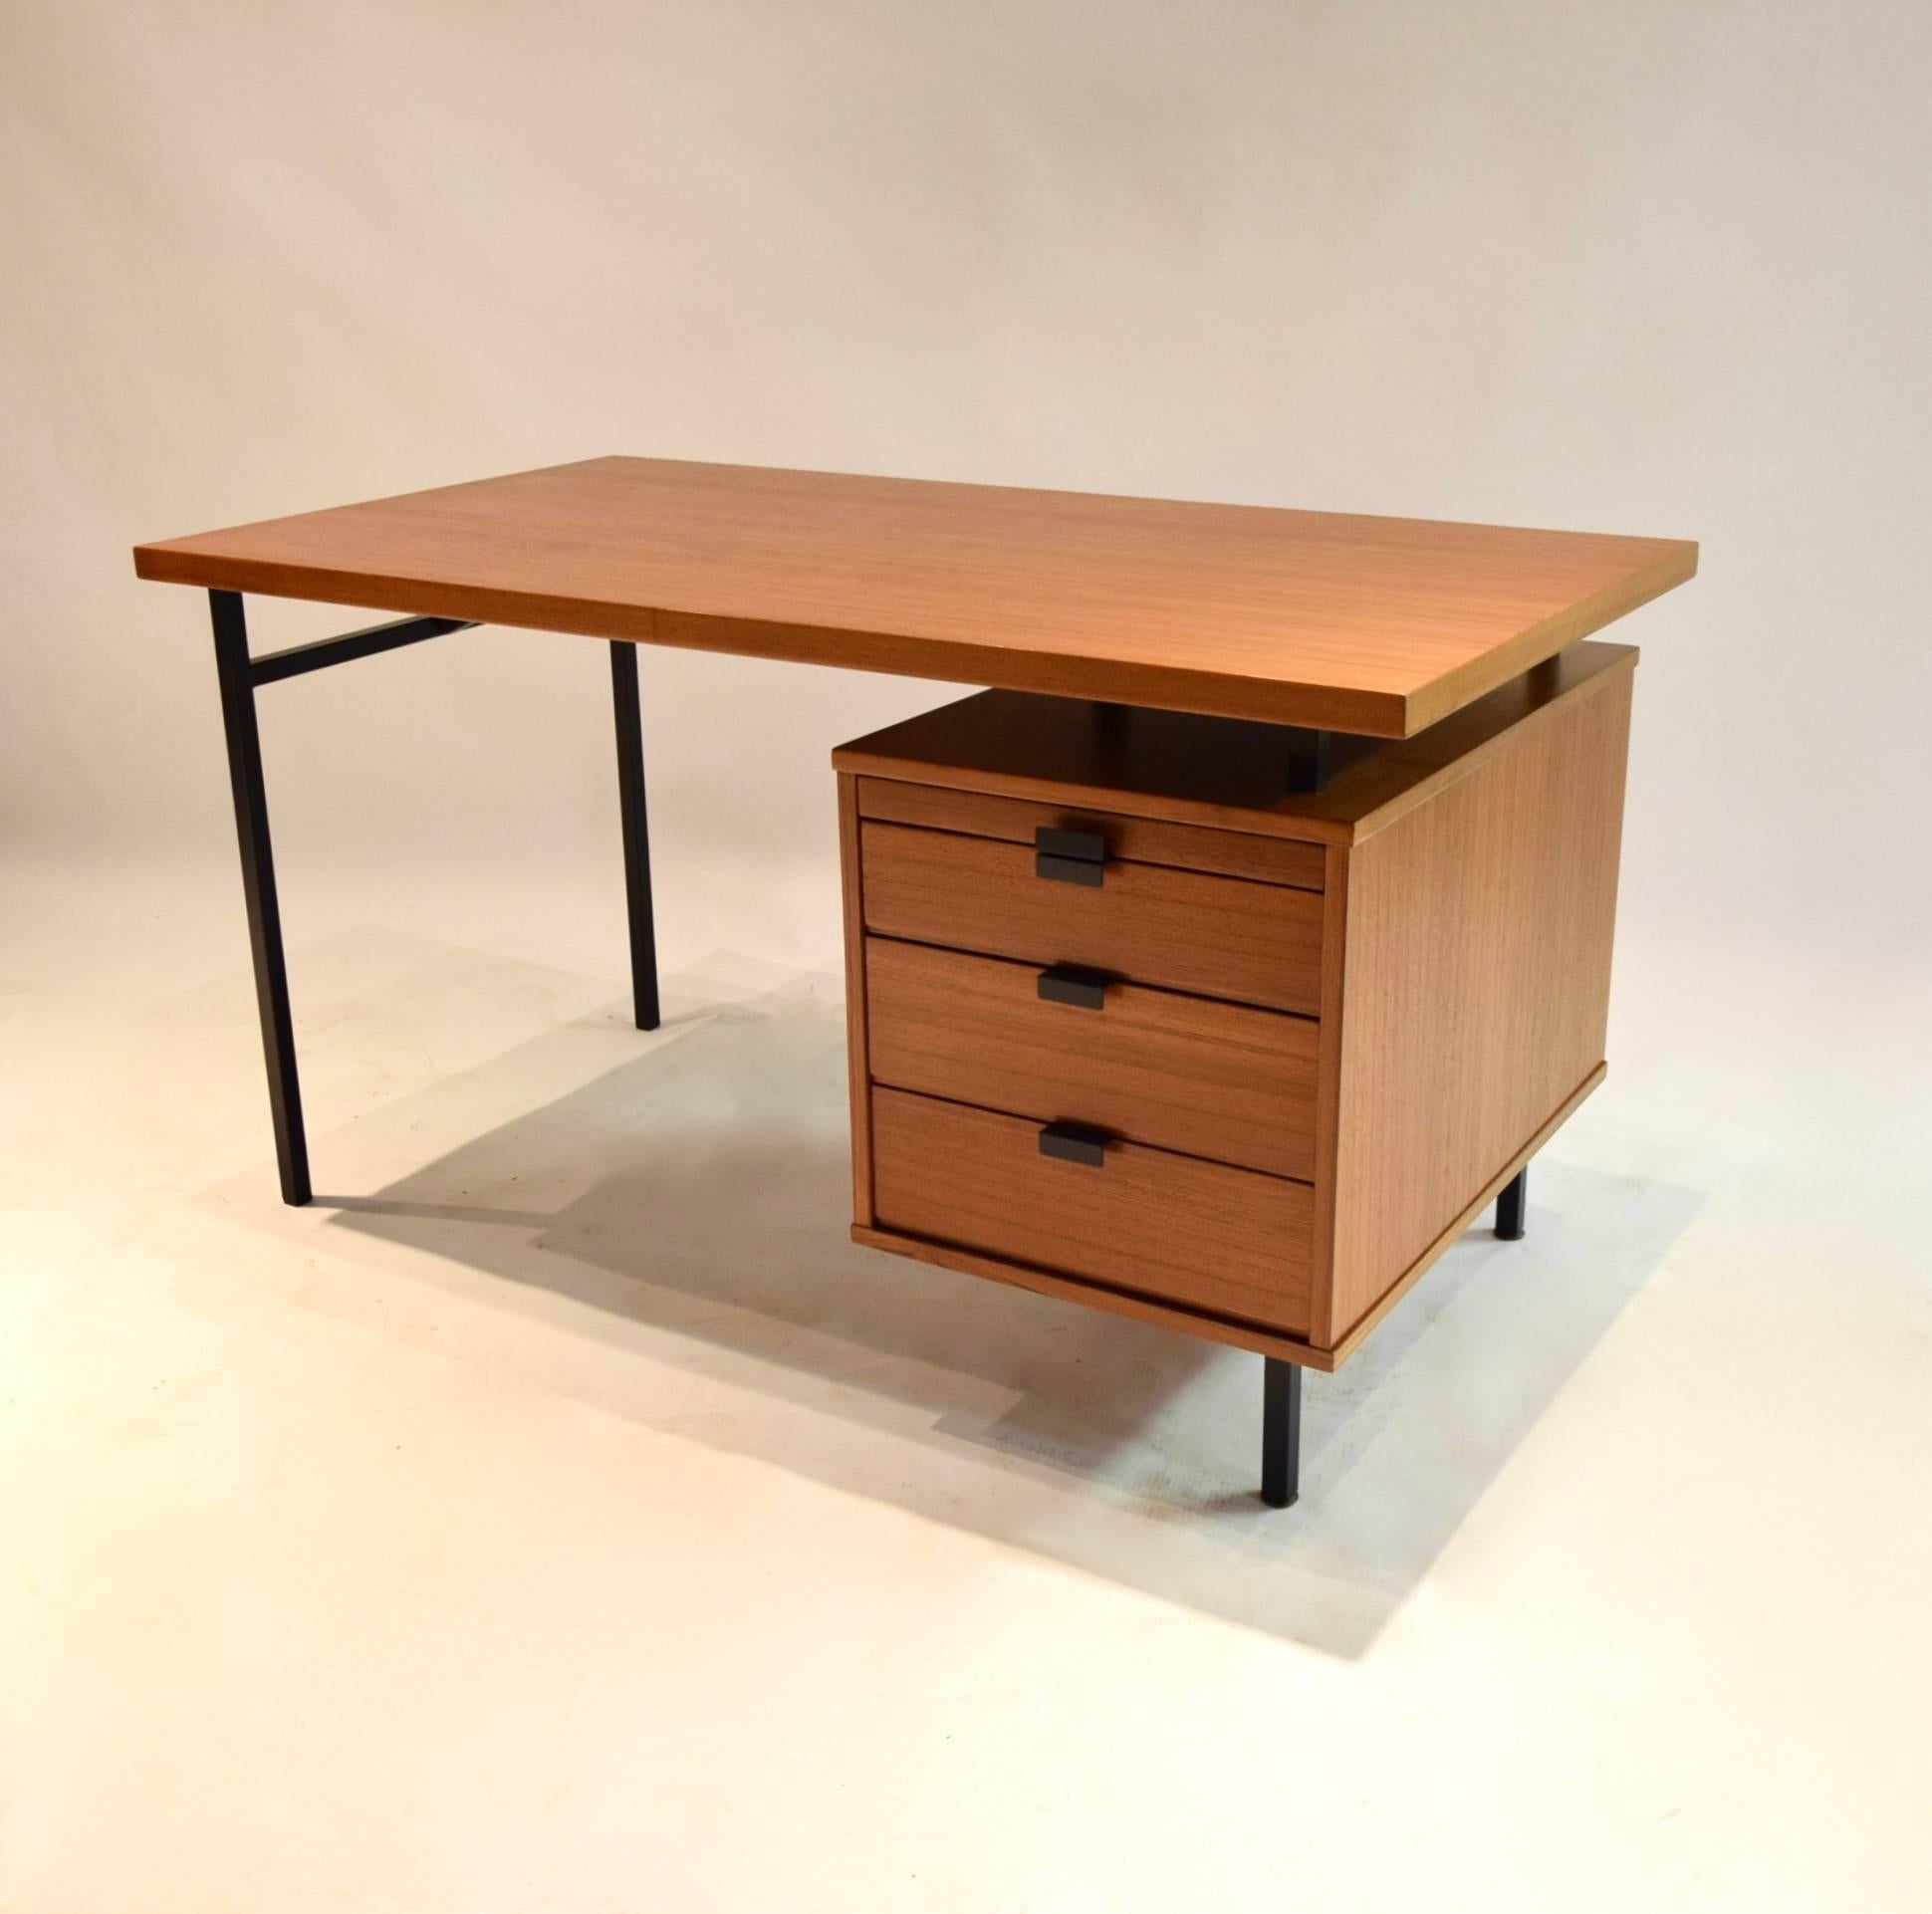 Mid-20th Century Desk in Teak with Four-Drawer Circa 1965 USA